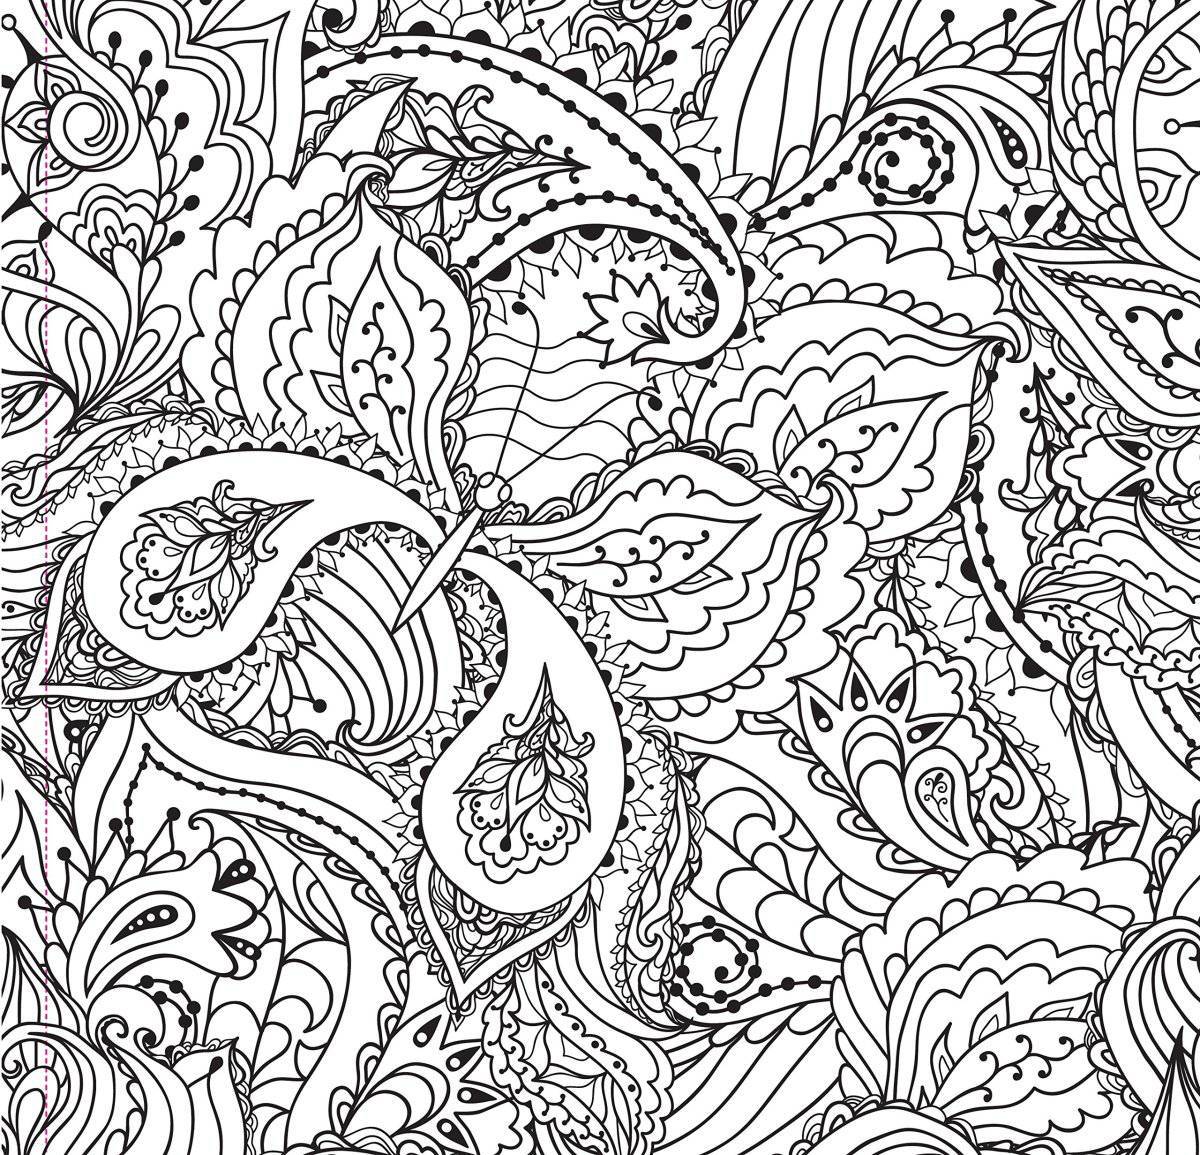 Exquisite coloring book for all adults